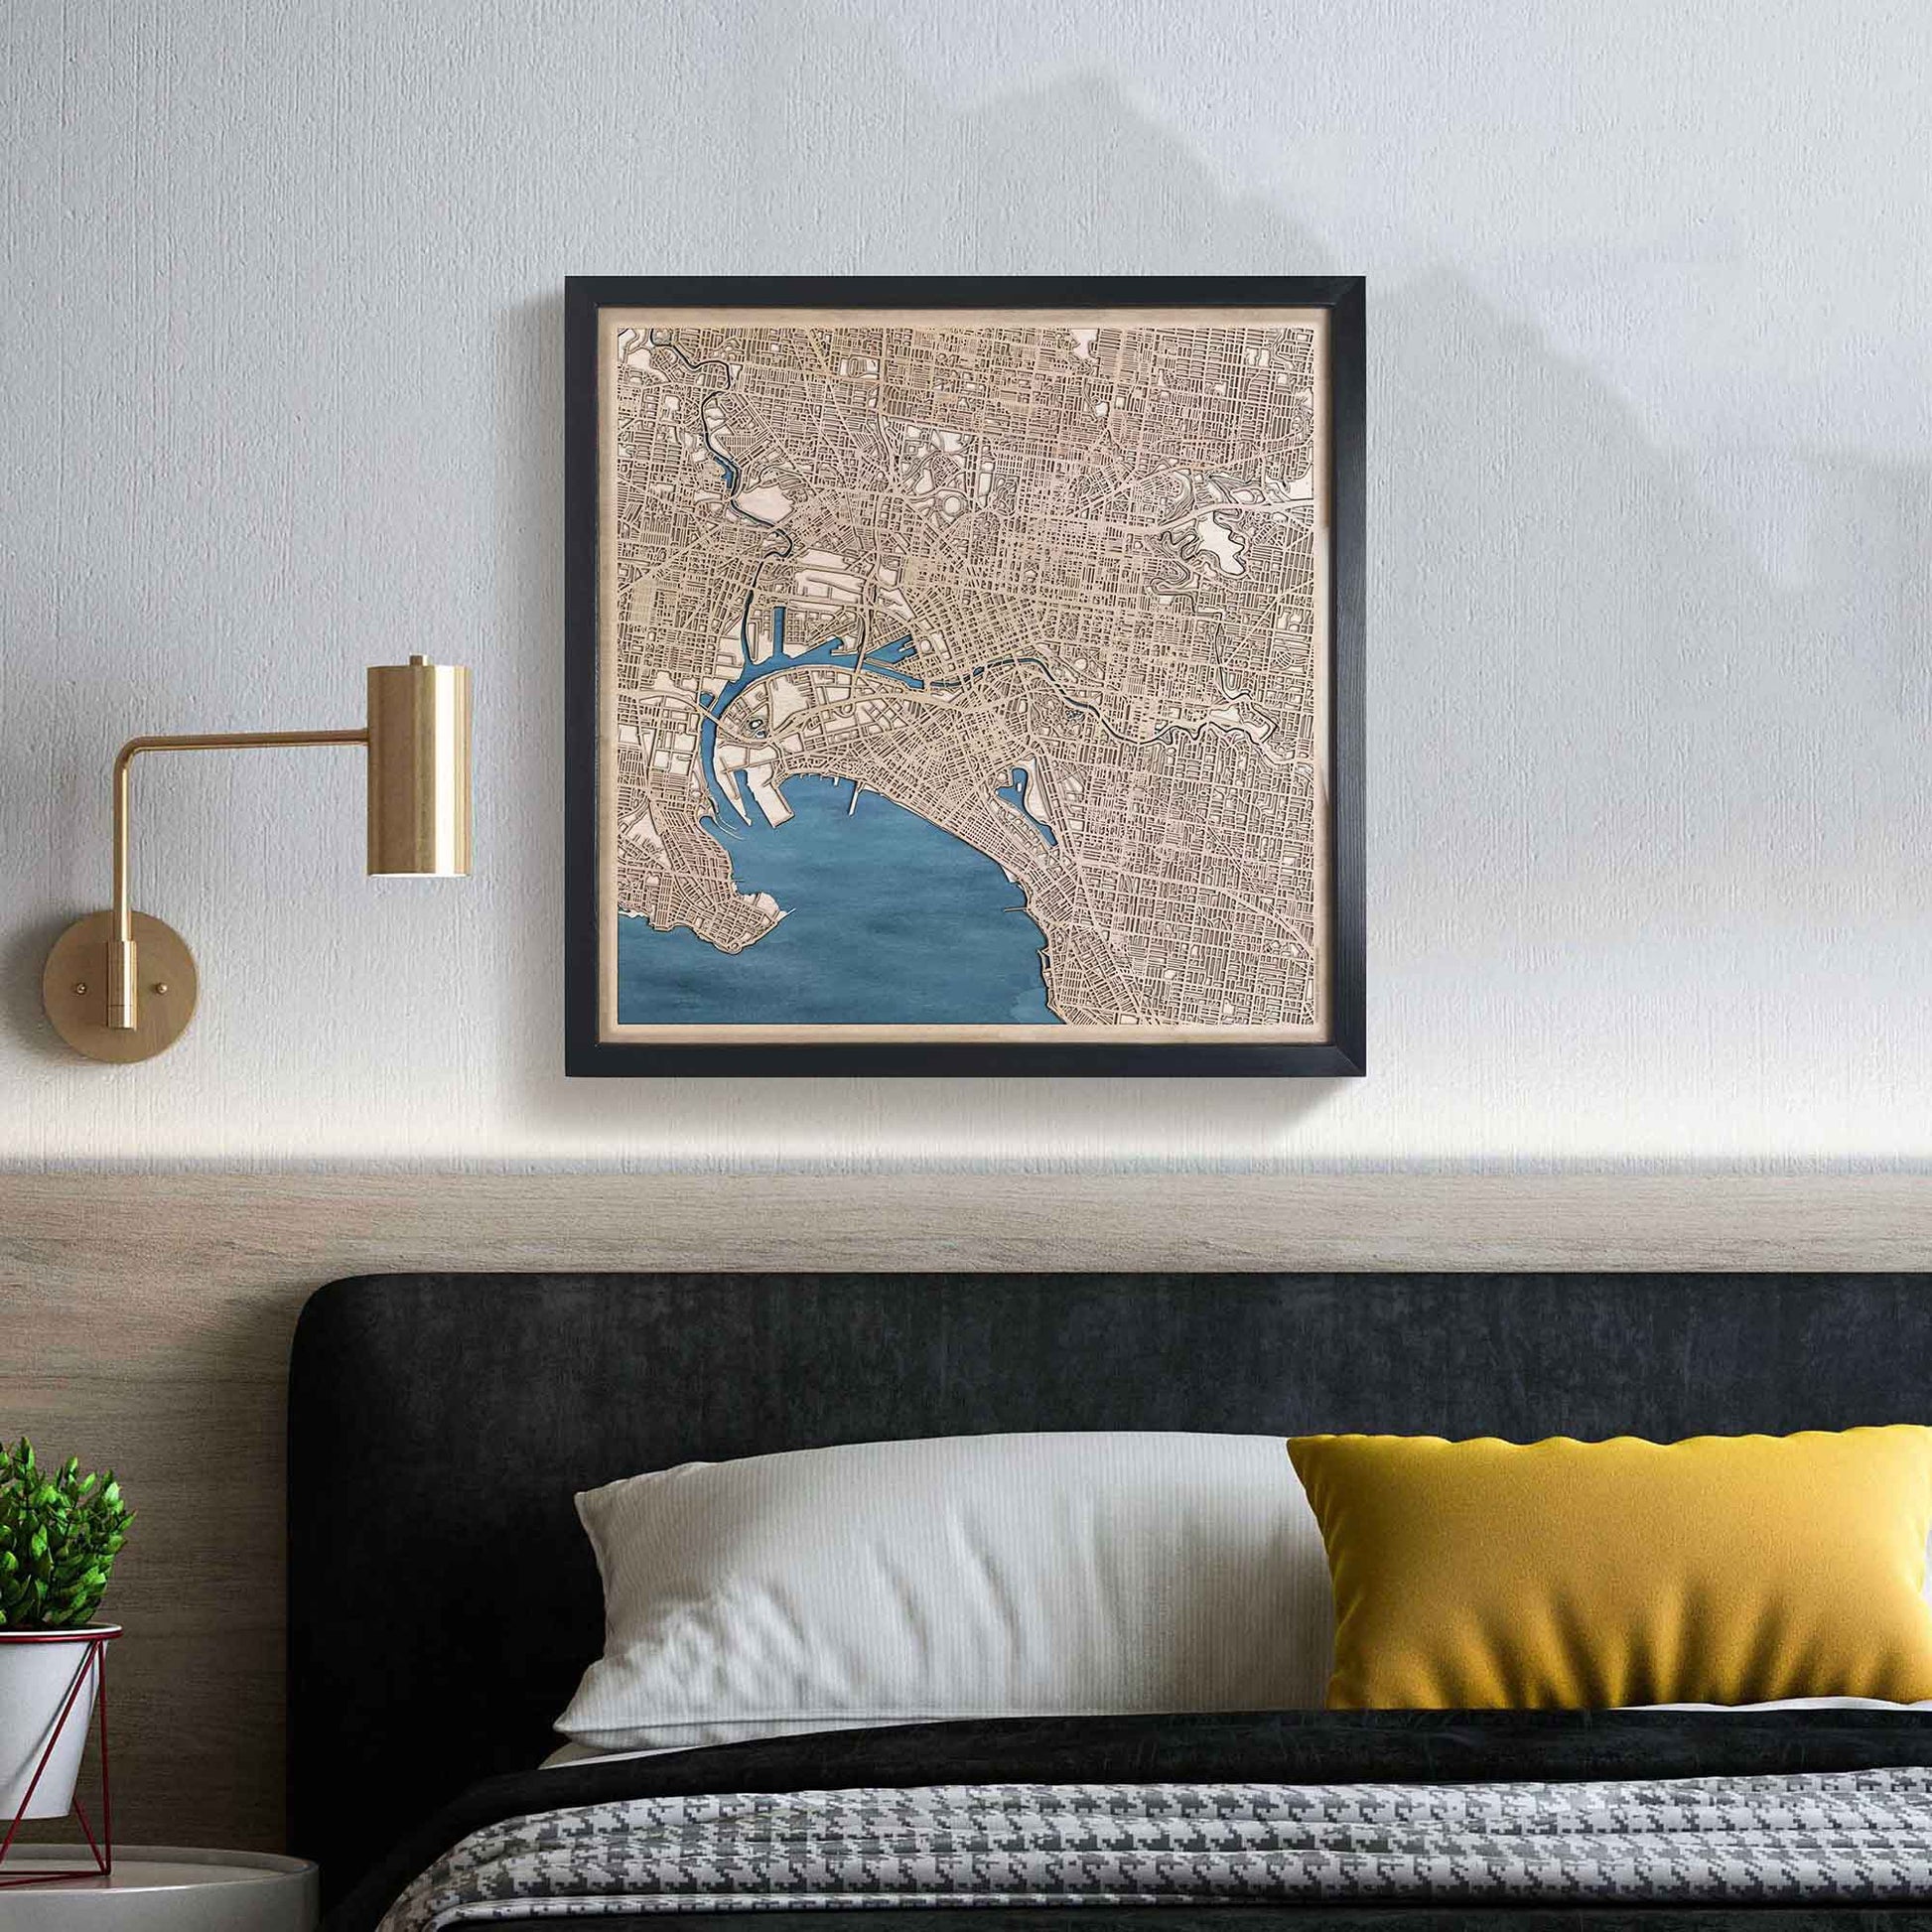 Melbourne Wooden Map by CityWood - Custom Wood Map Art - Unique Laser Cut Engraved - Anniversary Gift